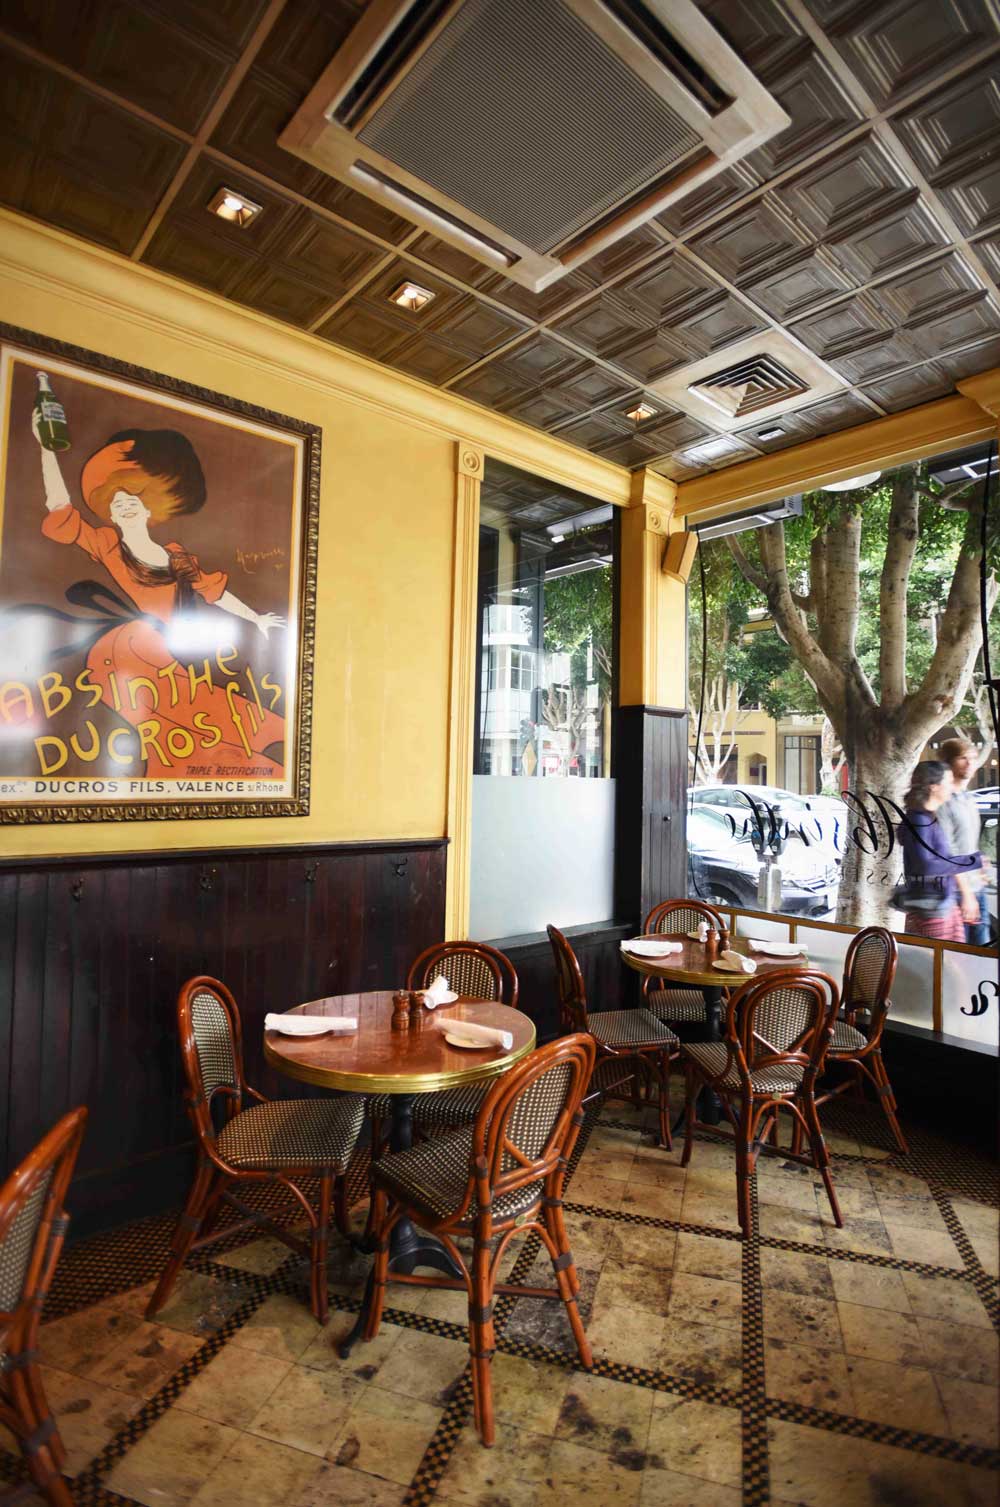 Warm walls and turn-of-the-century lithograph prints adorn the walls of the Brasserie